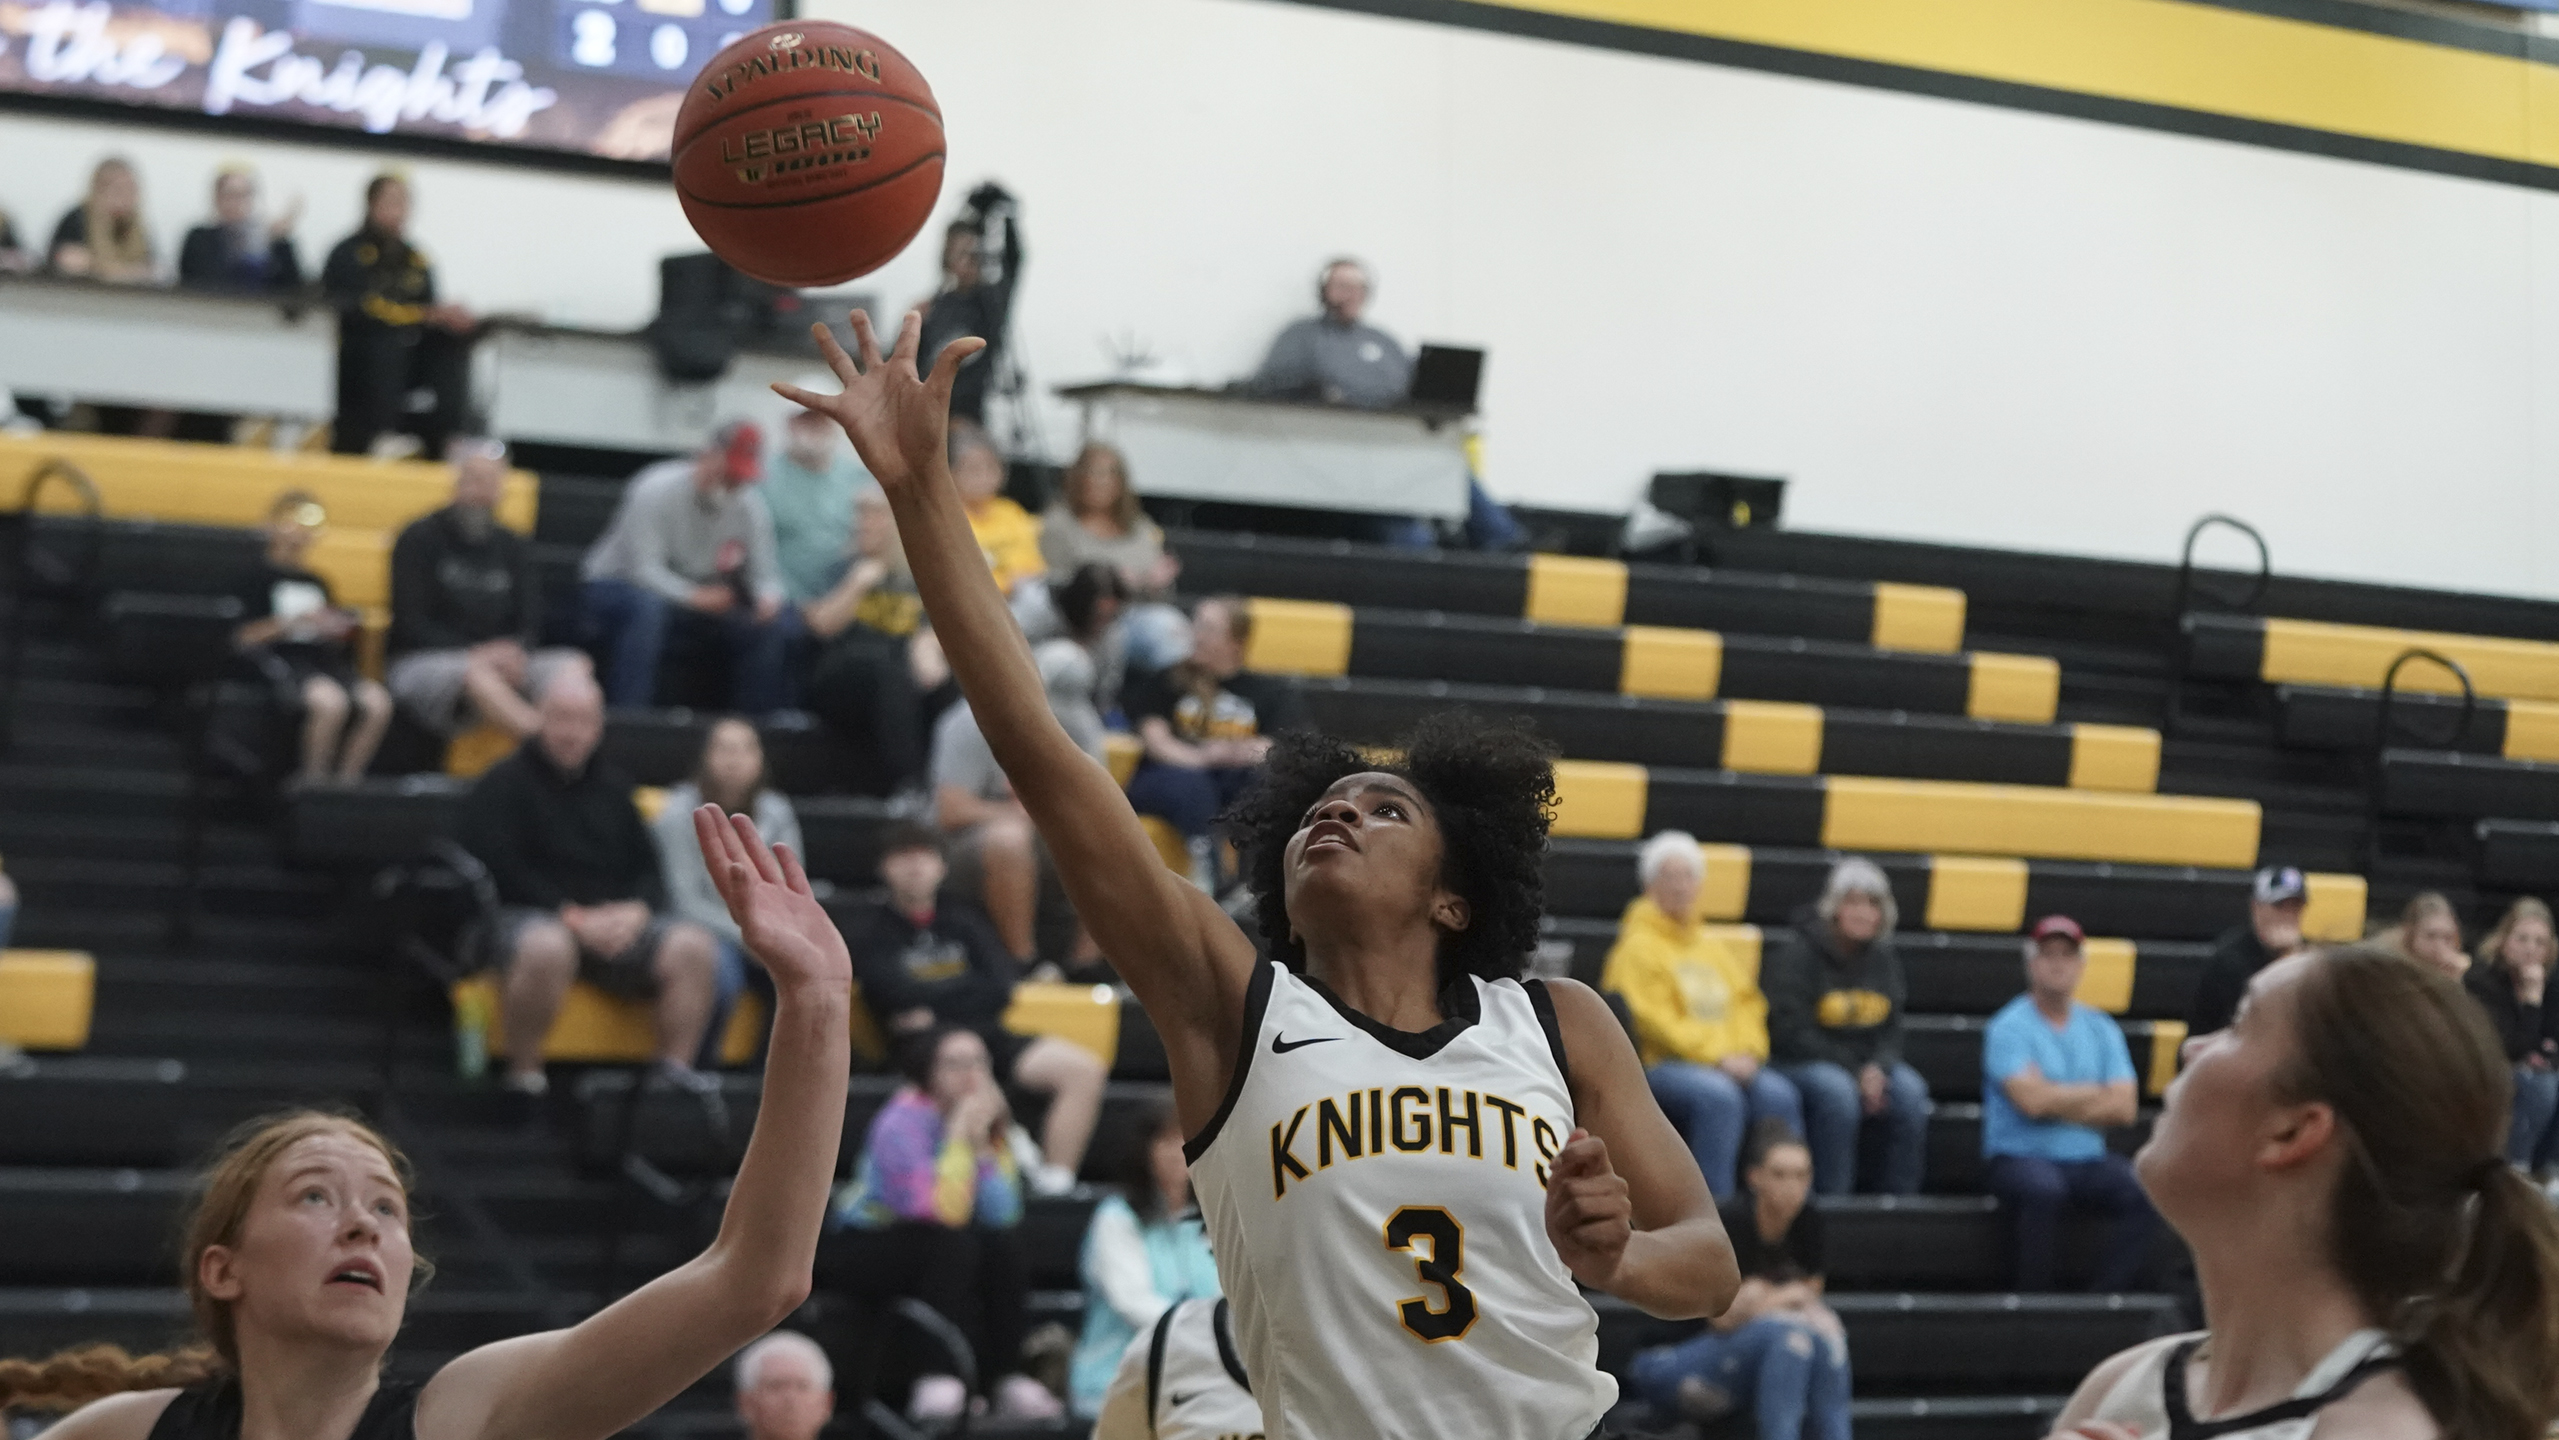 Knights square off against Kirkwood in district championship